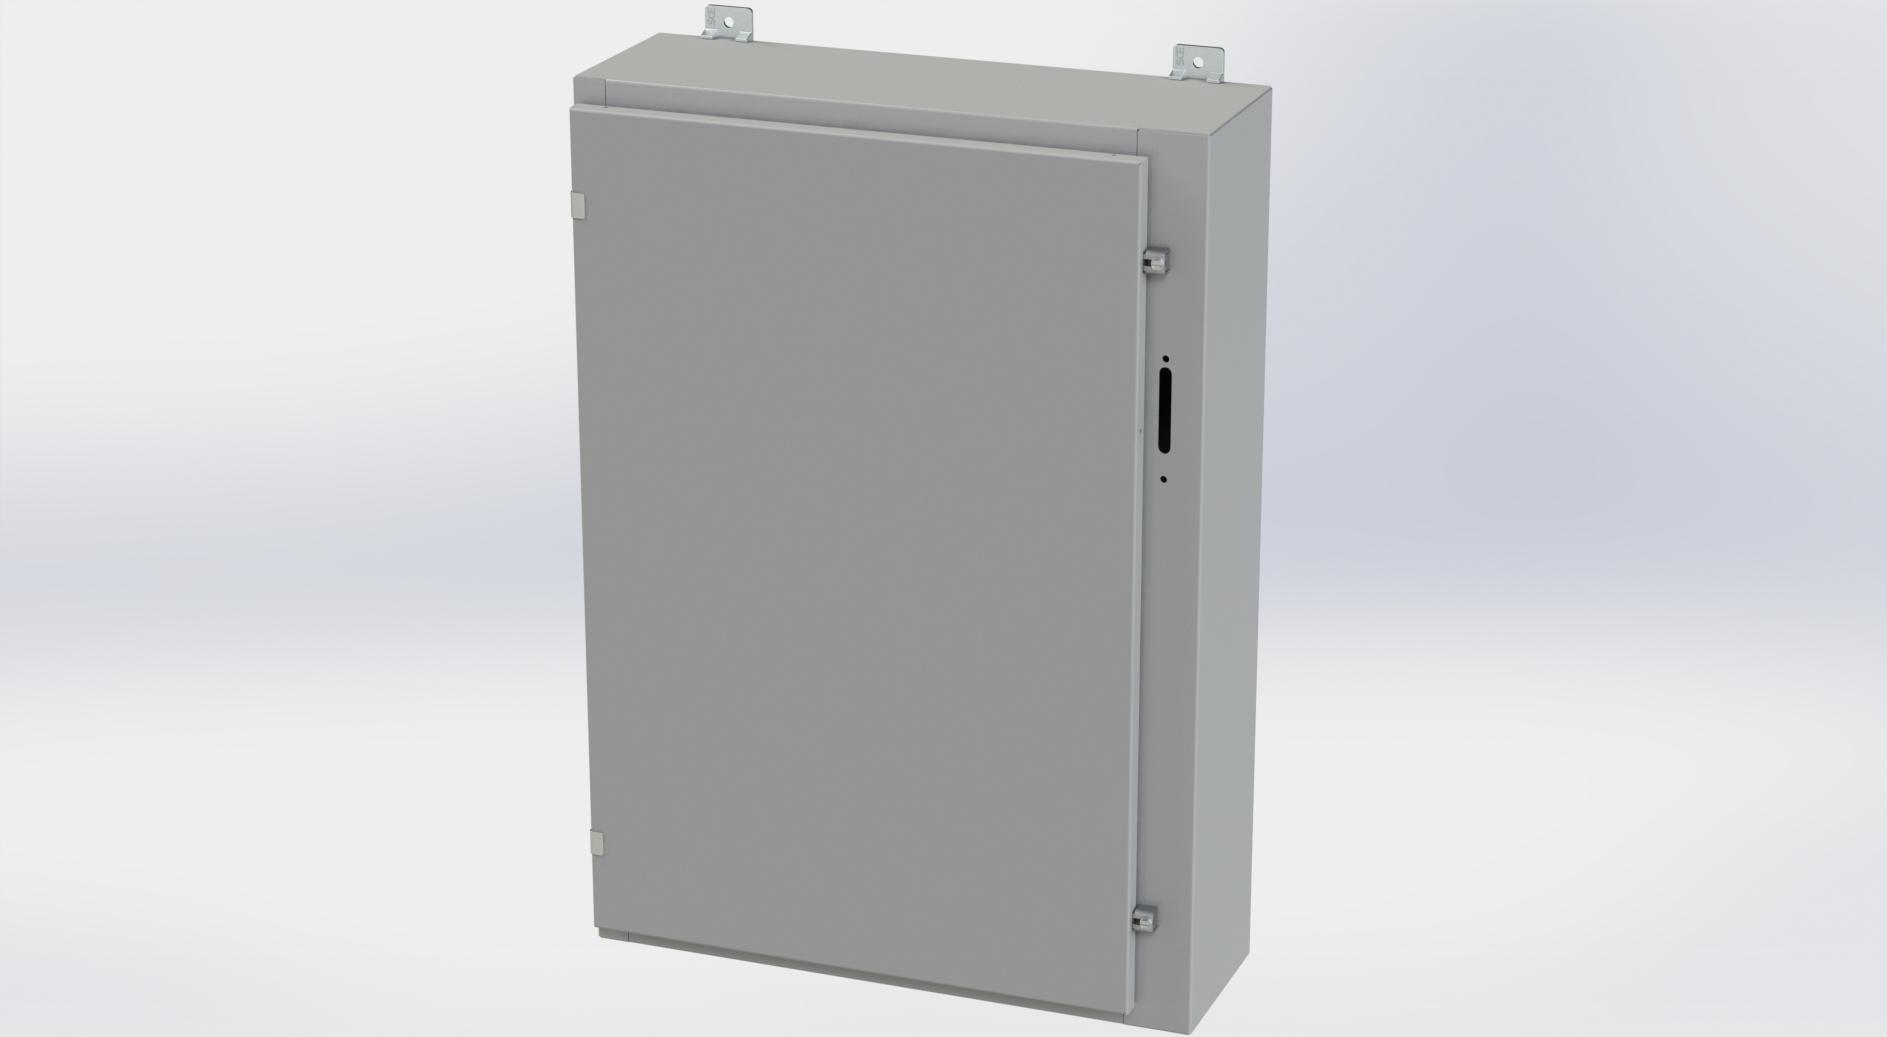 Saginaw Control SCE-36HS2508LP HS LP Enclosure, Height:36.00", Width:25.38", Depth:8.00", ANSI-61 gray powder coating inside and out. Optional sub-panels are powder coated white.